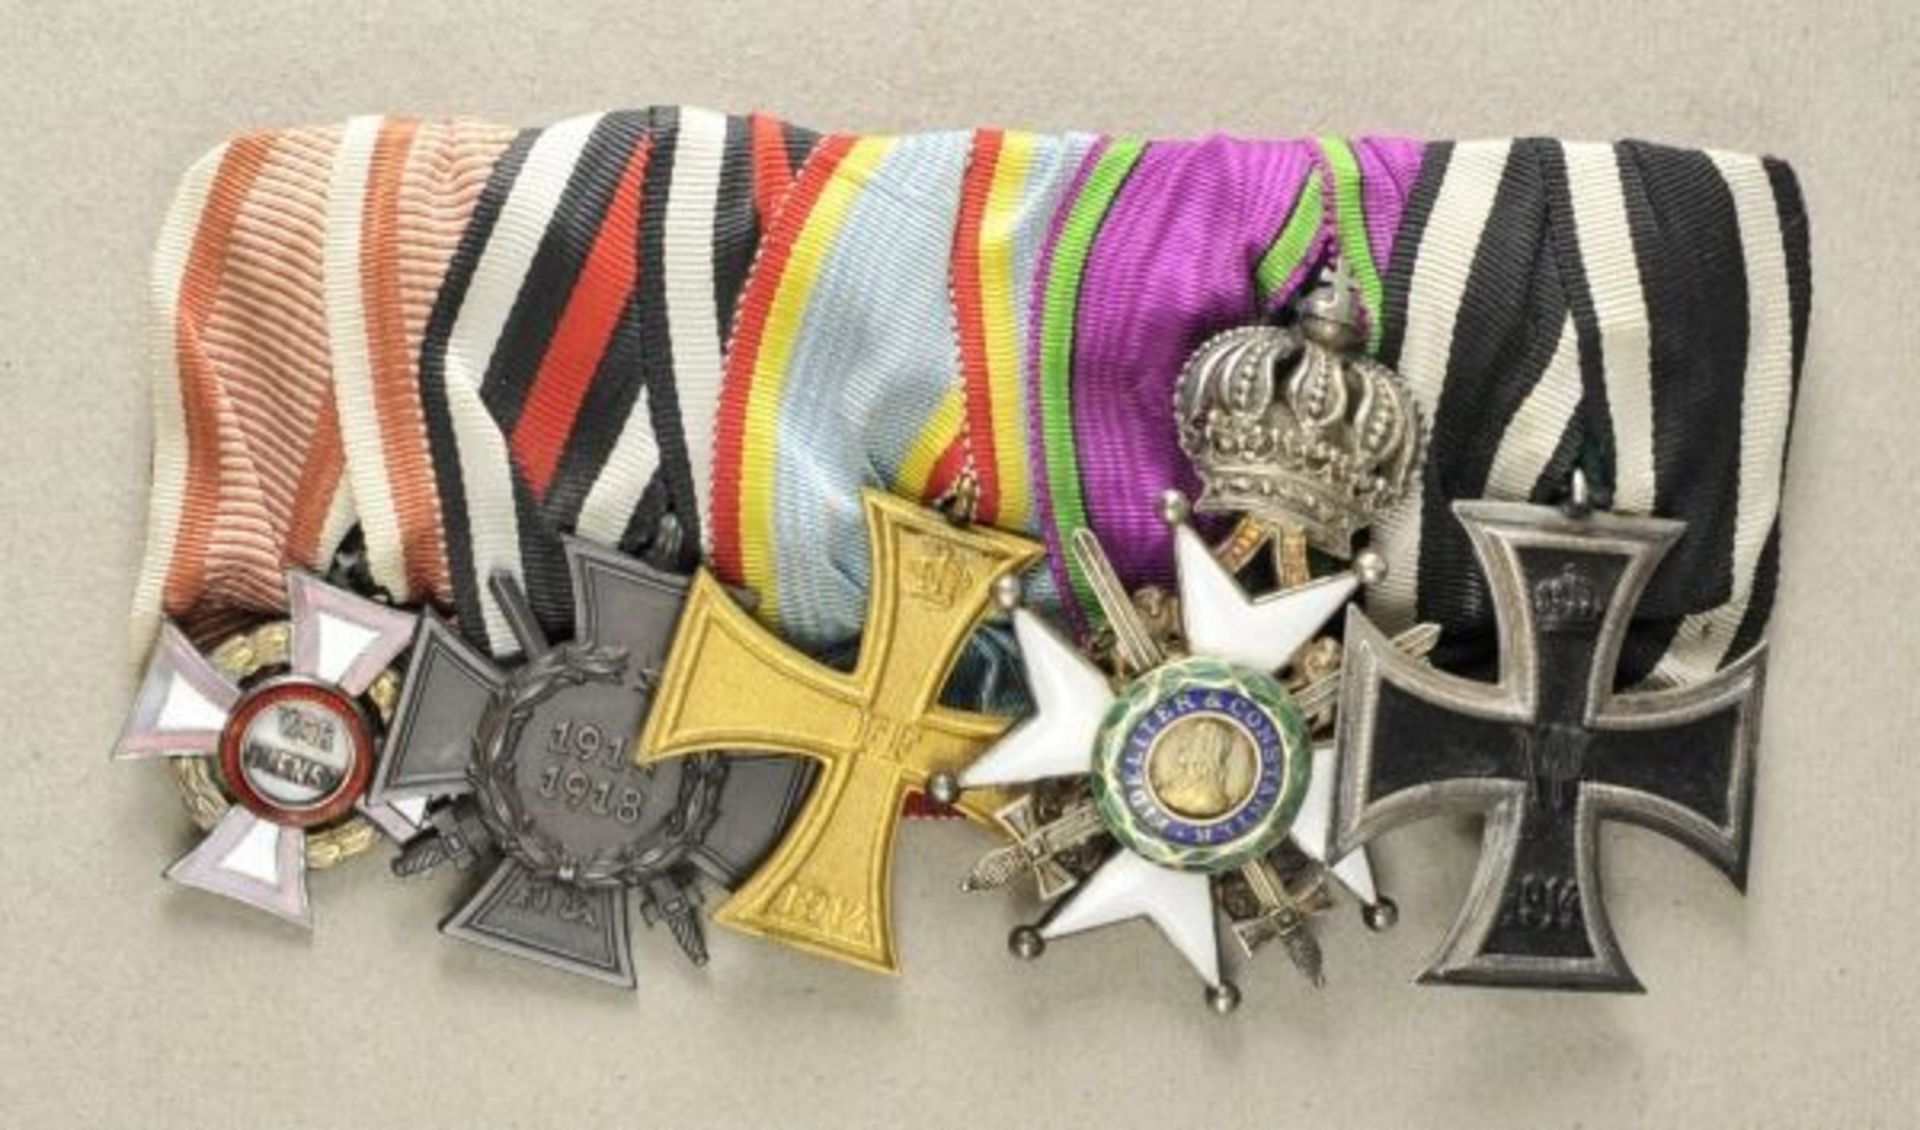 Opening: 450 EUR    0.1.) Collection Rick Lundström  Saxony duchies: big curly sewed medalbar of